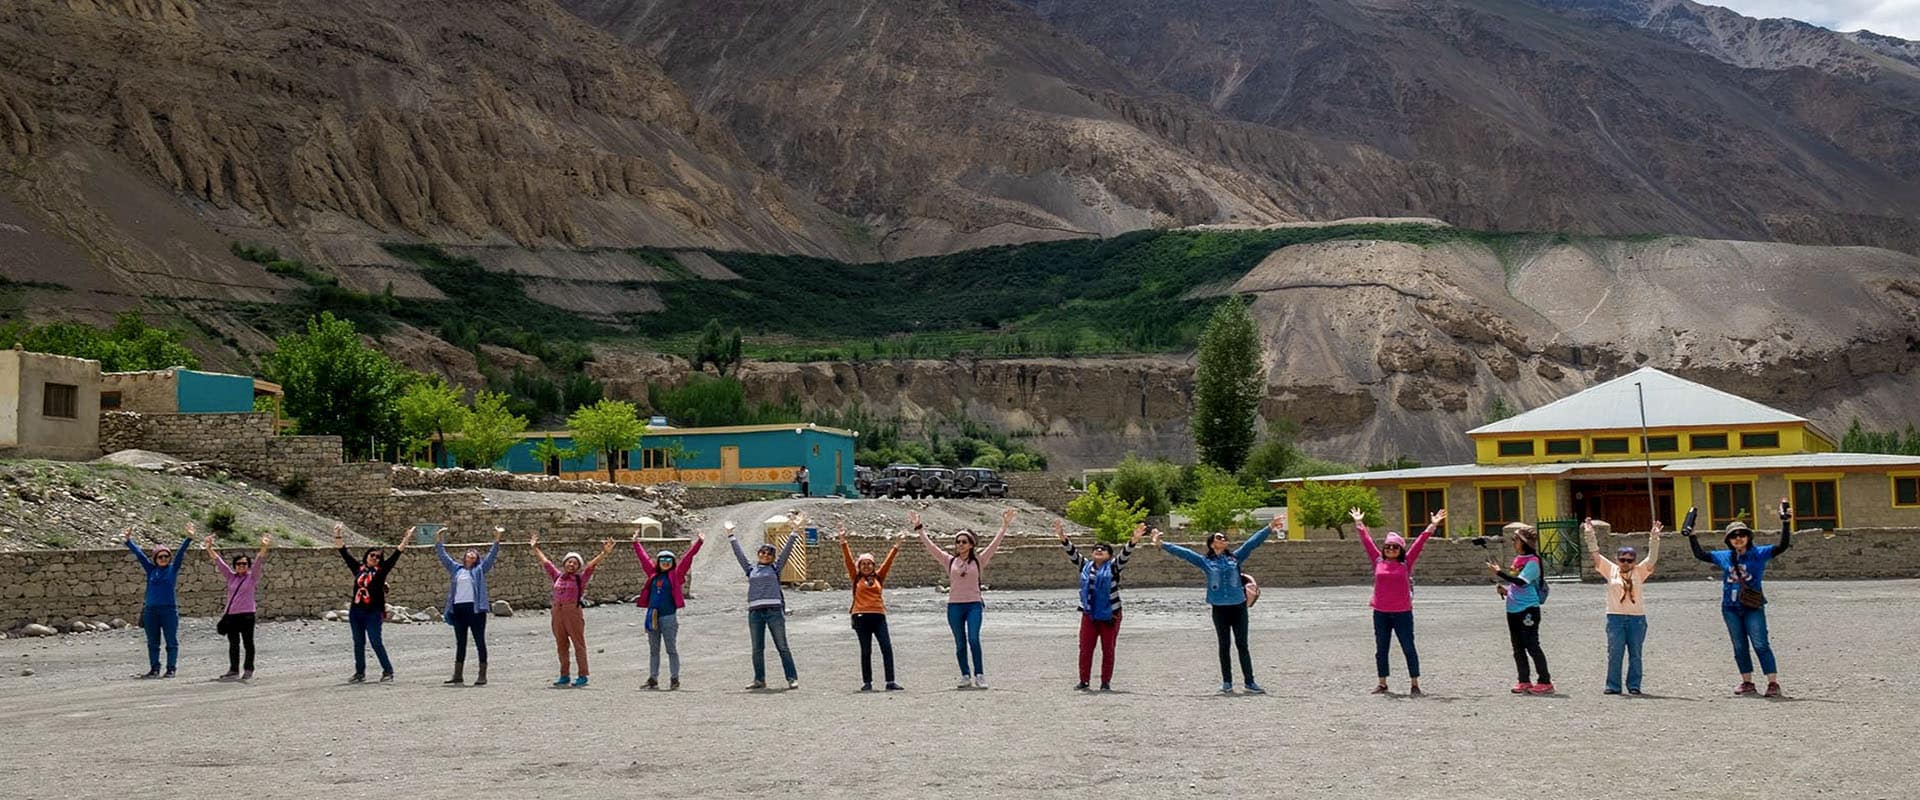 Day 14: Visit Shimshal Valley - A Photographic Odyssey